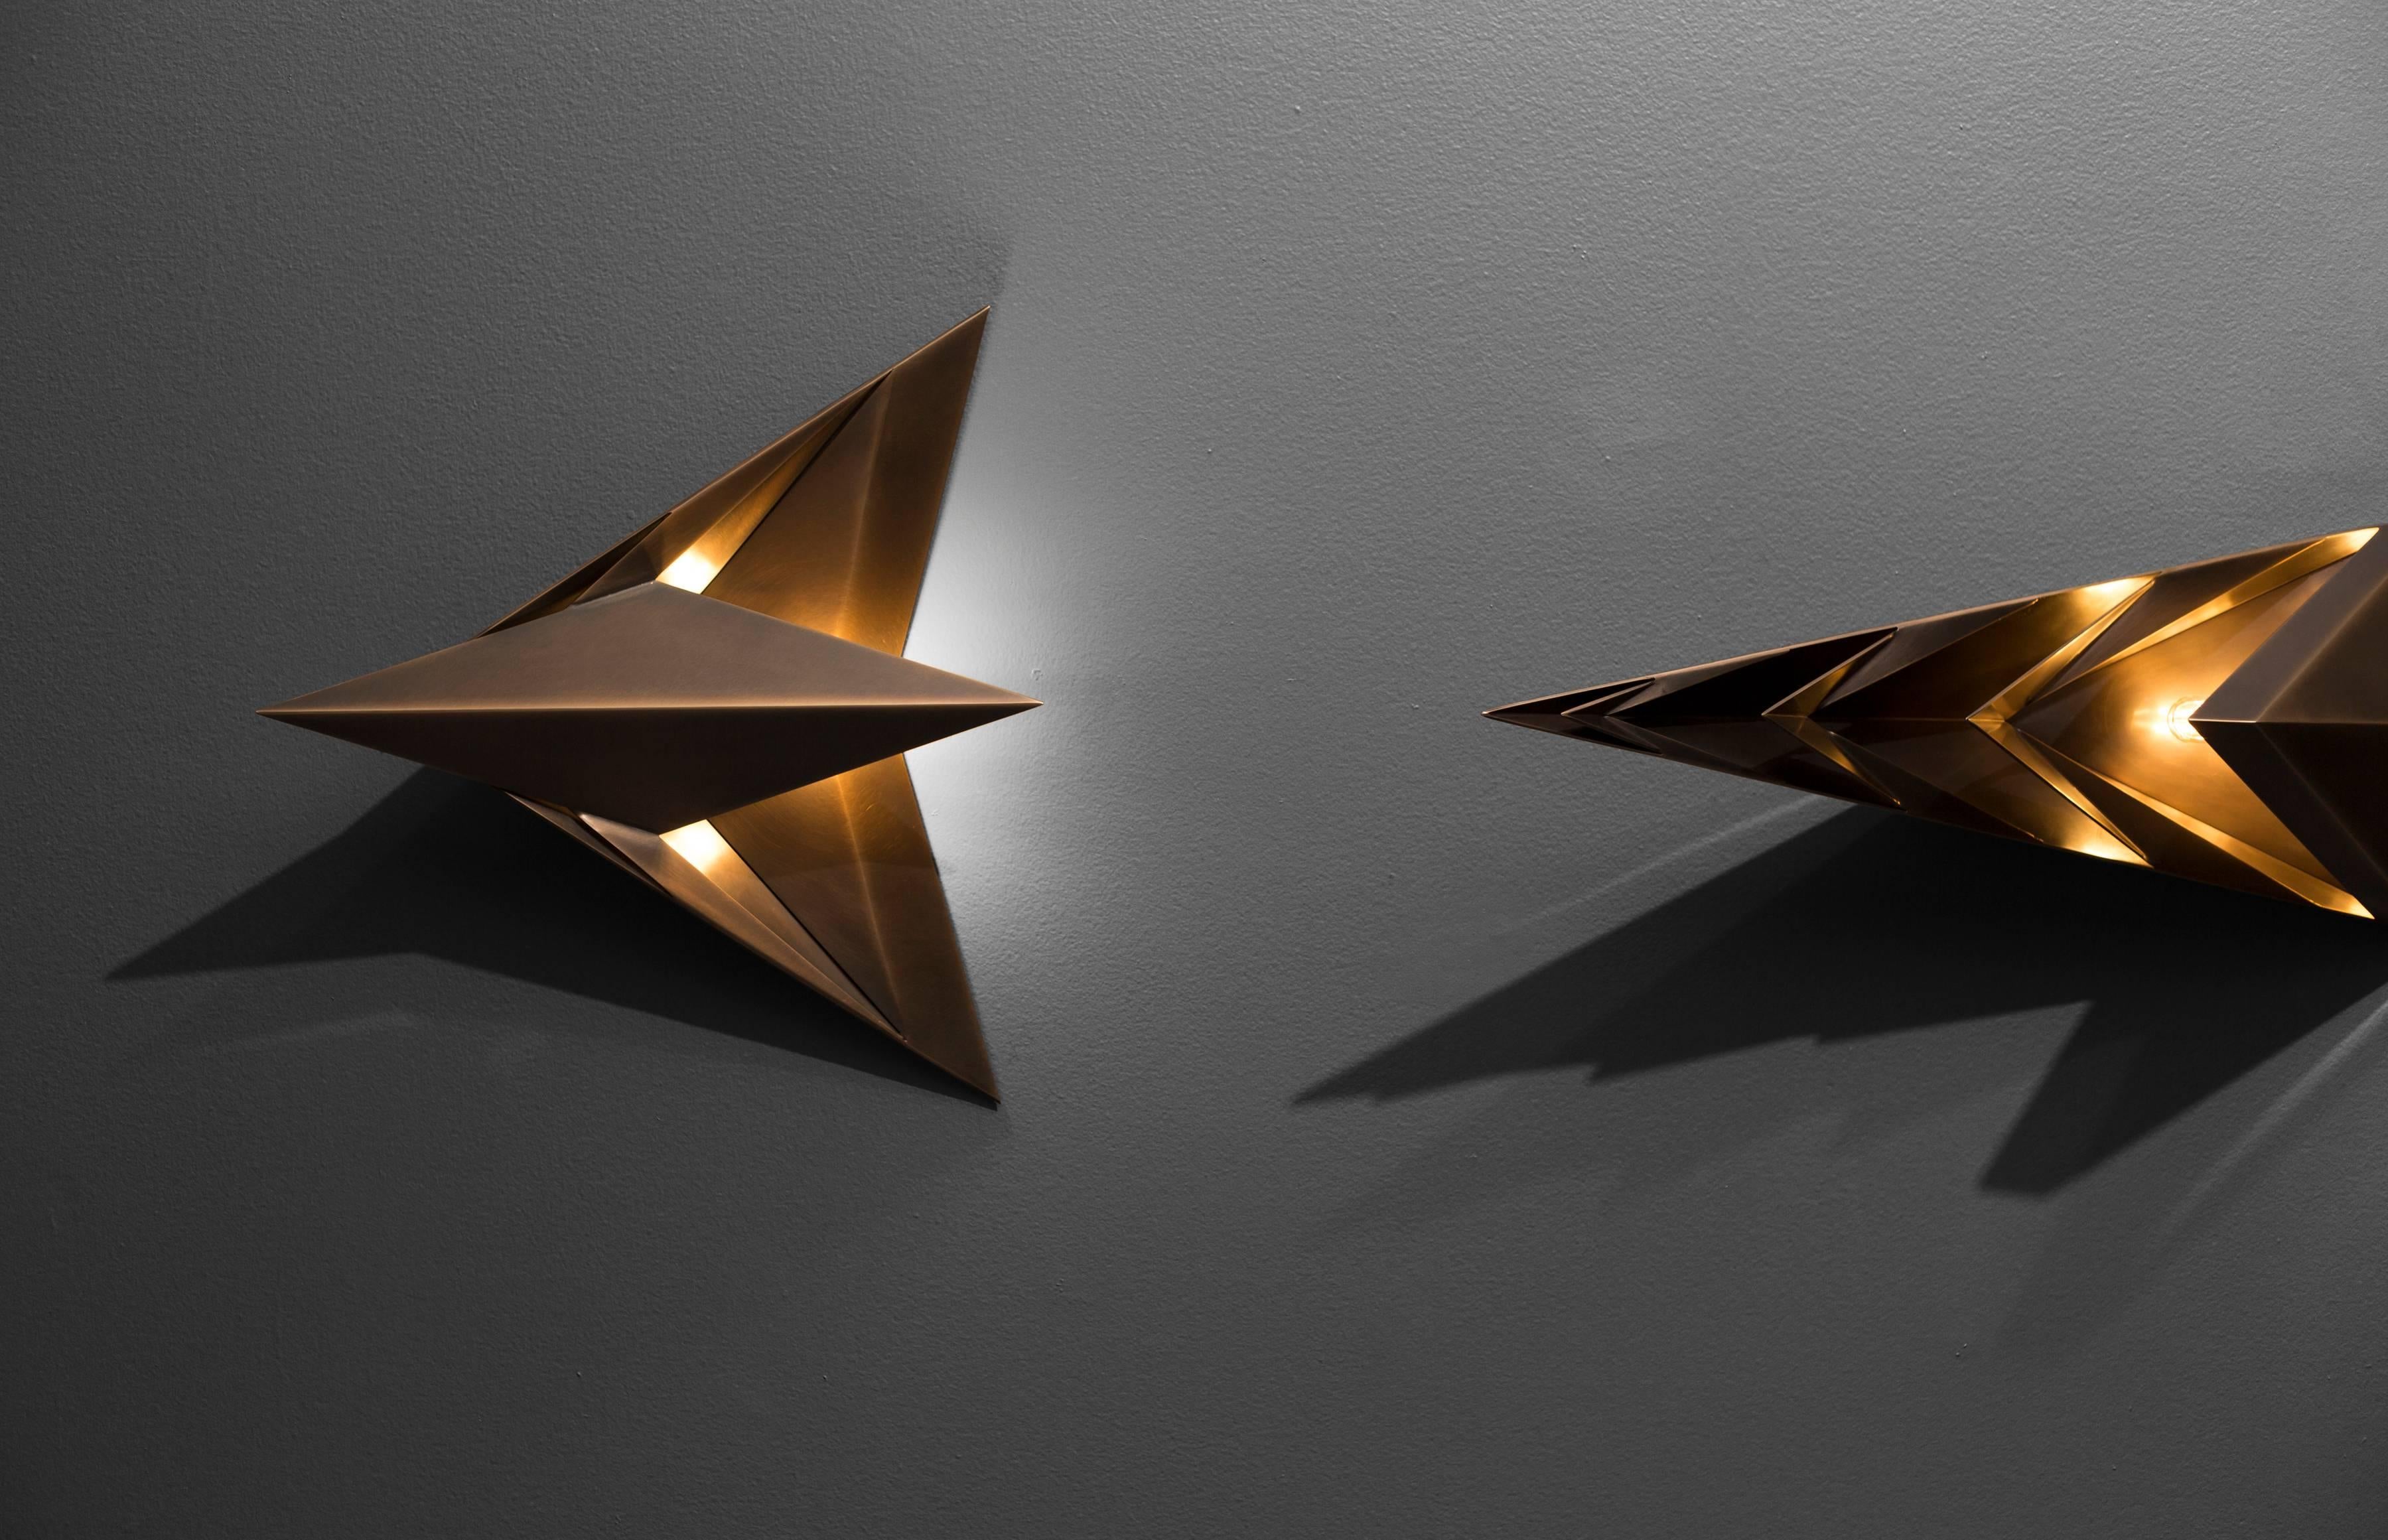 Metalwork Parenthetical Light, Aged Bronze, Sculptural Wall Lights, by Force/Collide For Sale